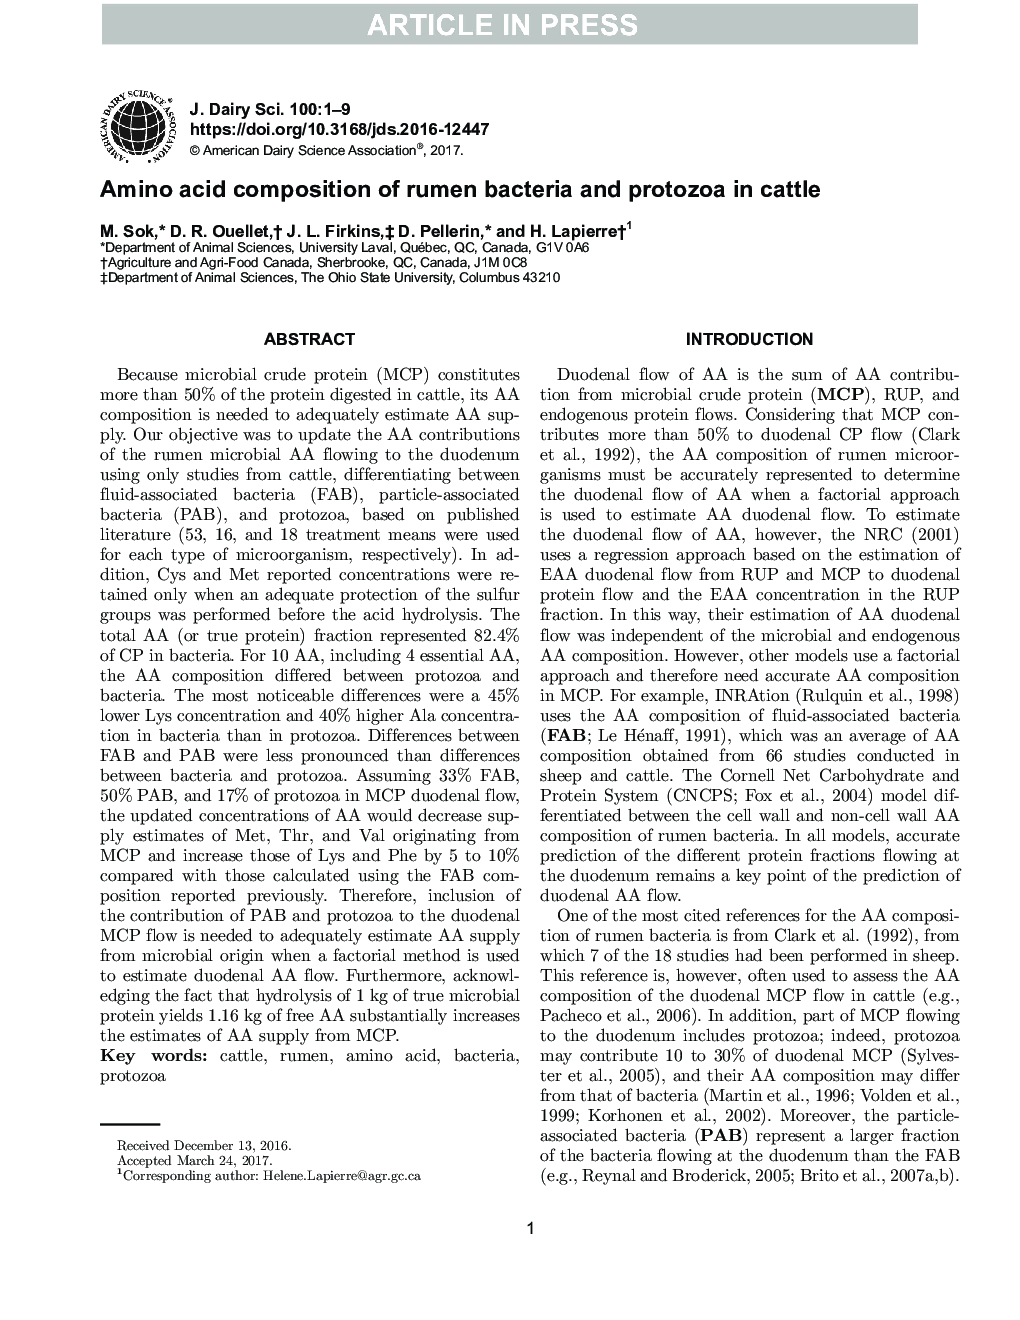 Amino acid composition of rumen bacteria and protozoa in cattle